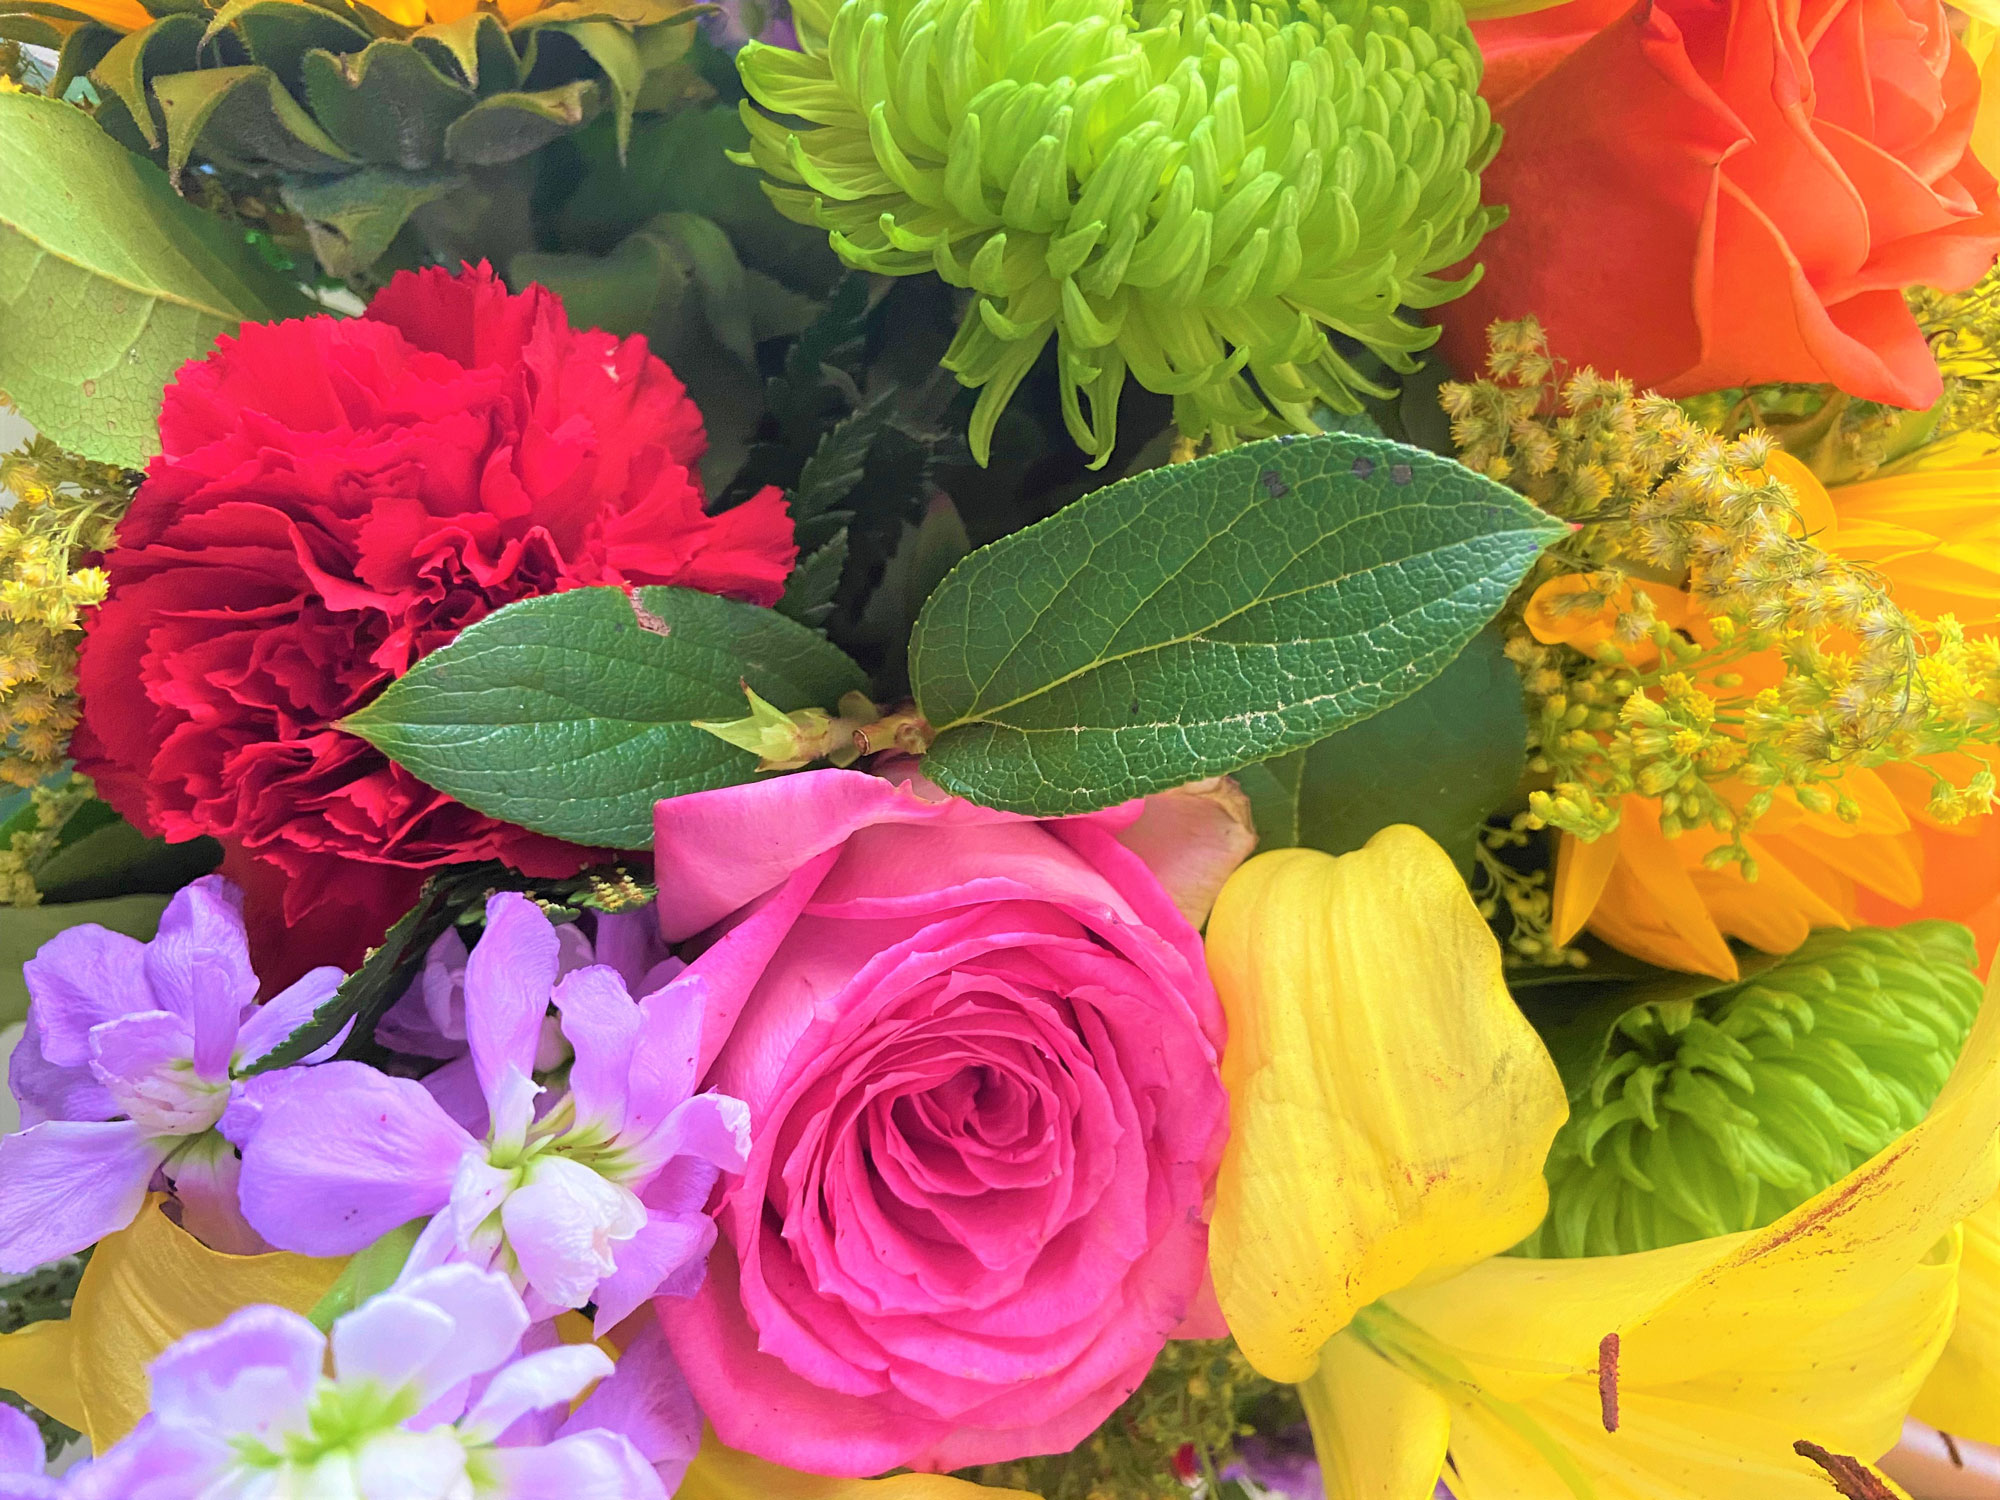 A colorful bouquet of assorted flowers